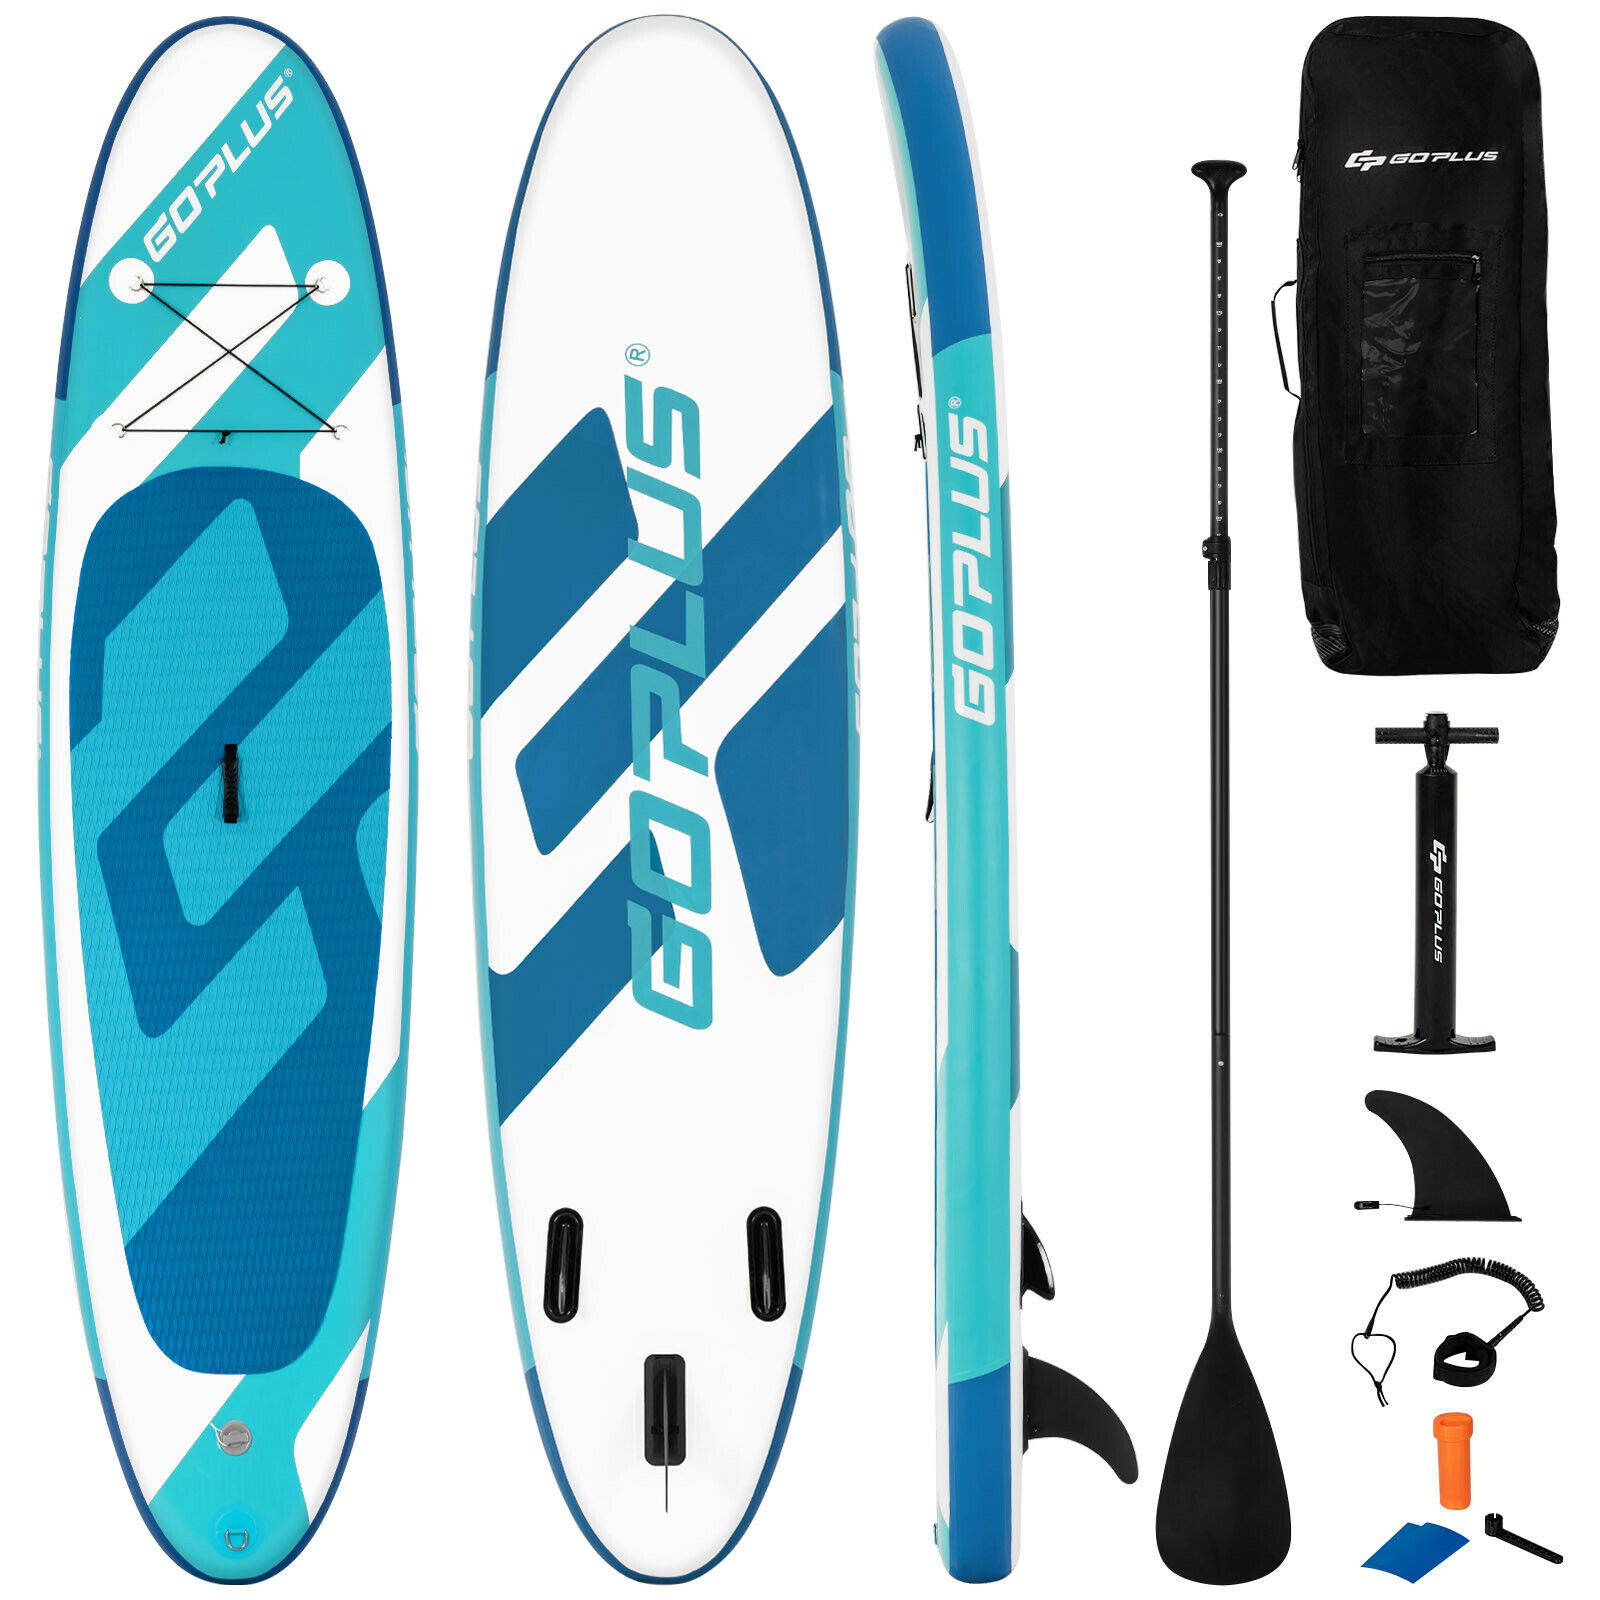 11FT Inflatable Stand Up Paddle Board with Hand Pump-Lake Blue